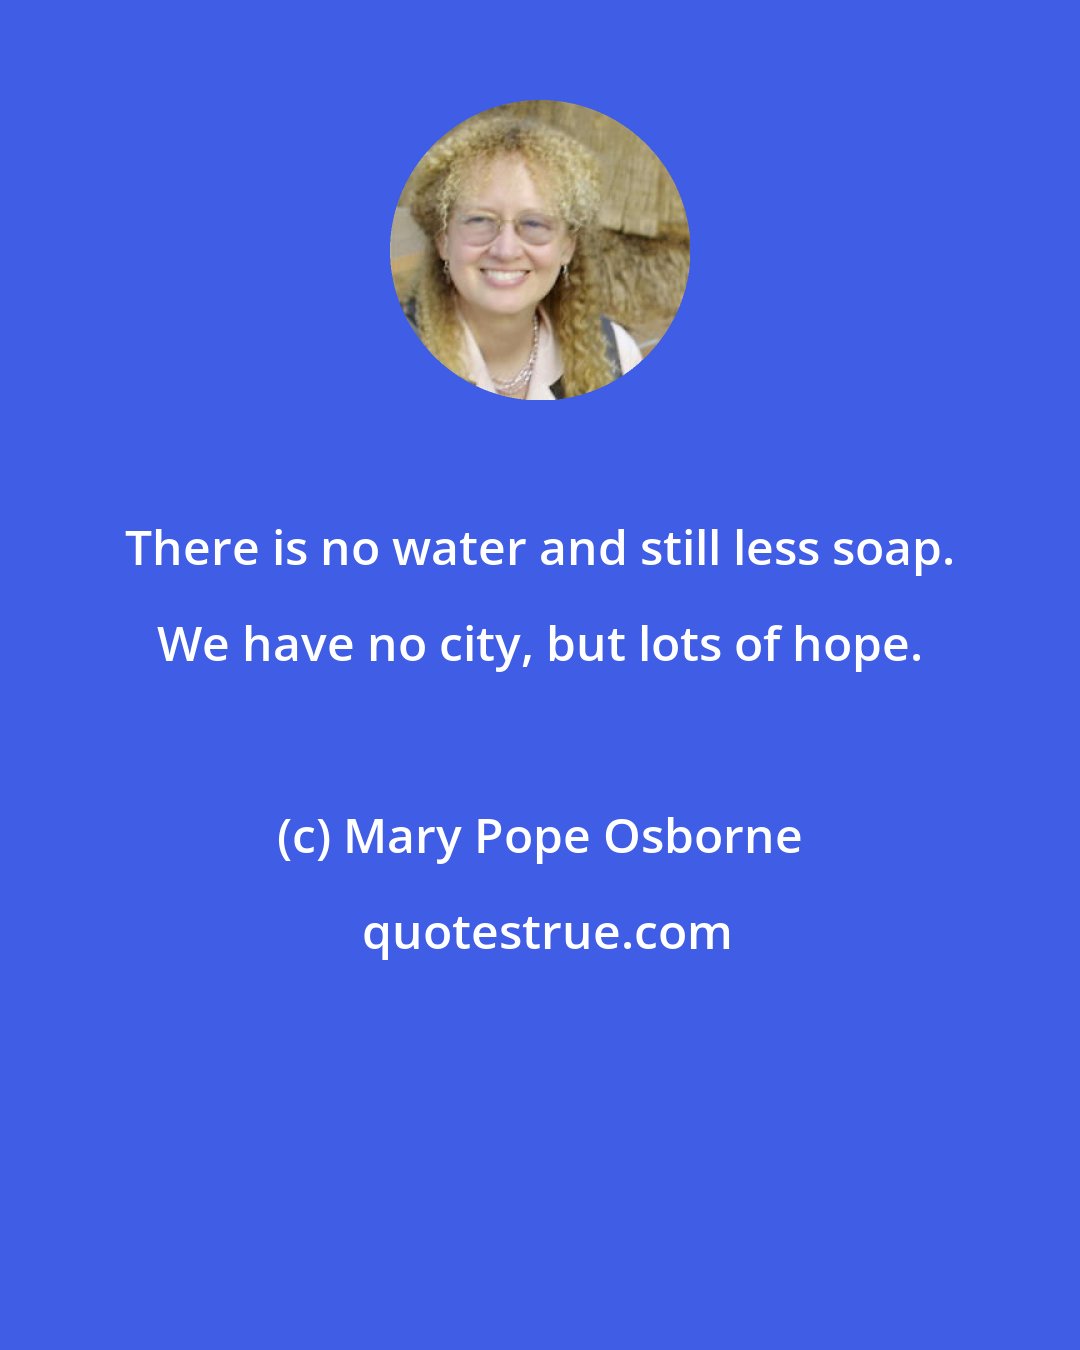 Mary Pope Osborne: There is no water and still less soap. We have no city, but lots of hope.